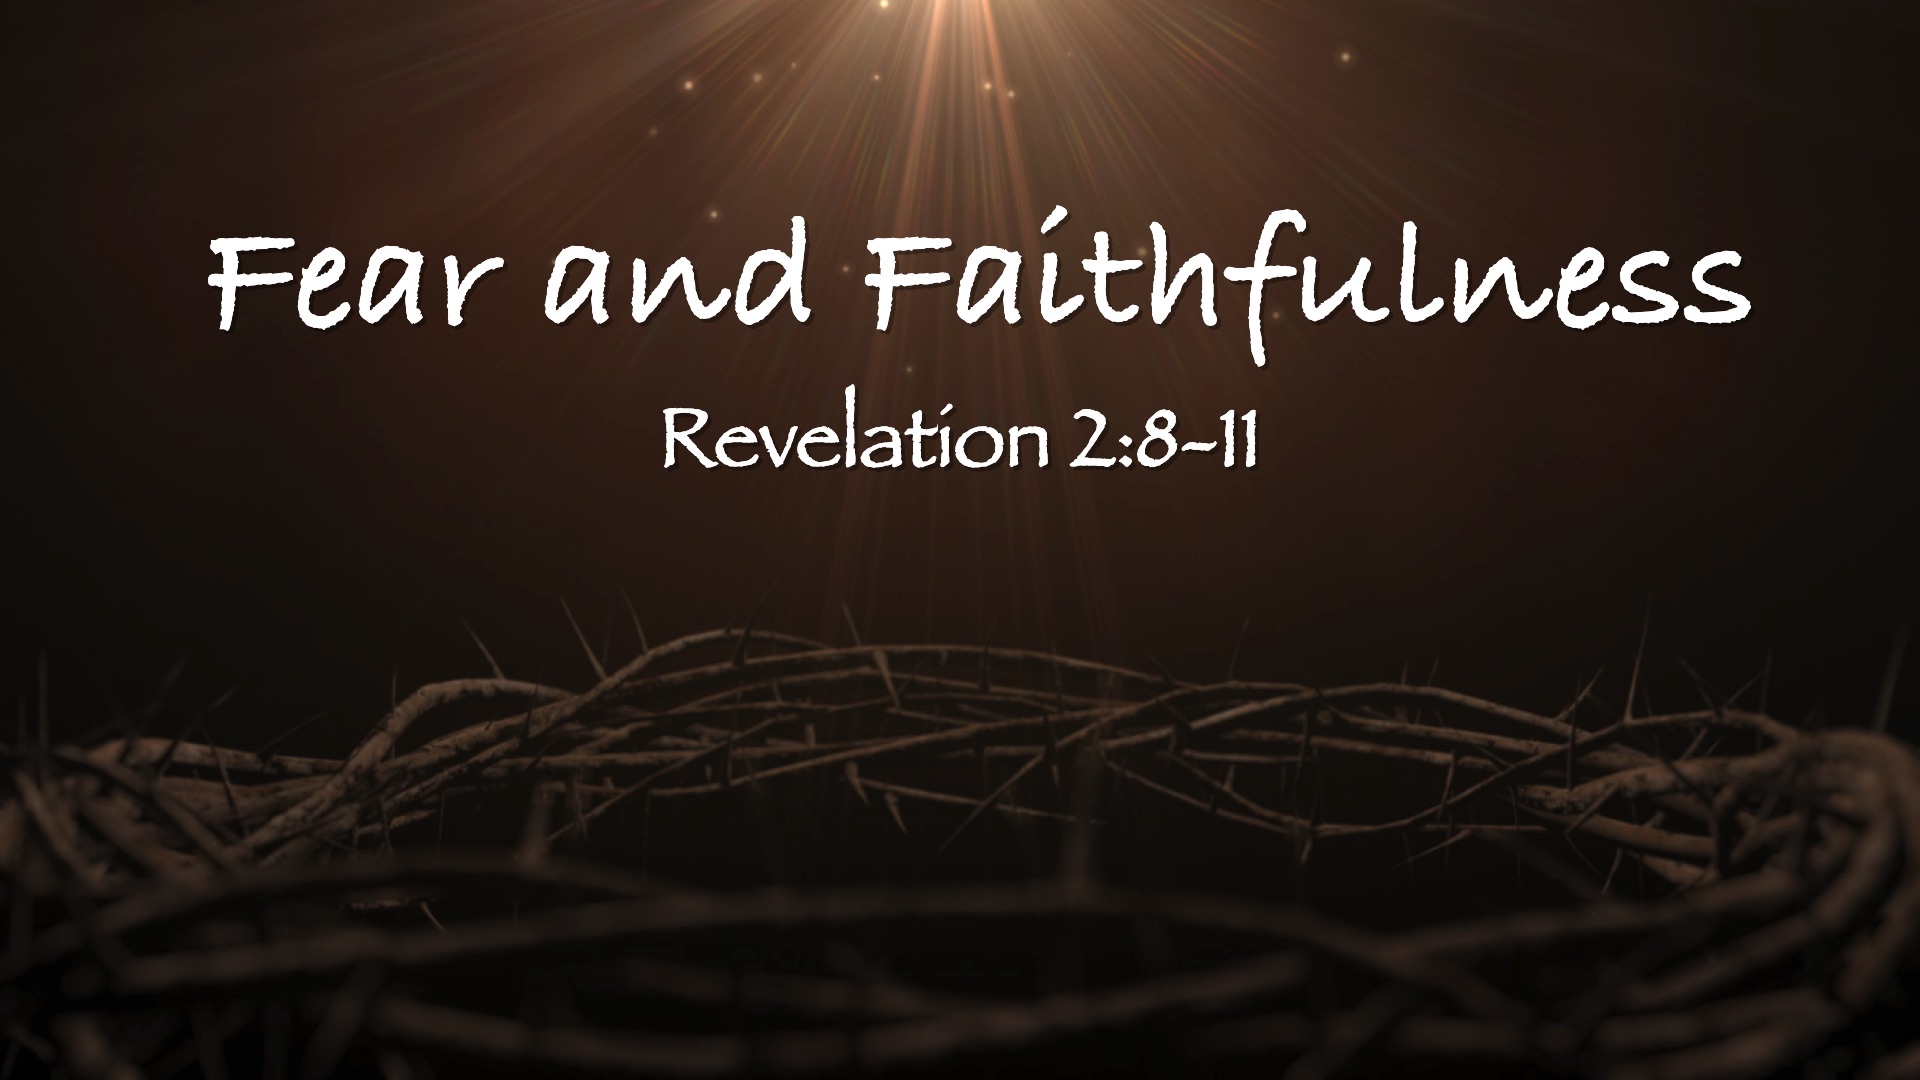 The Book of Revelation: Fear and Faithfulness